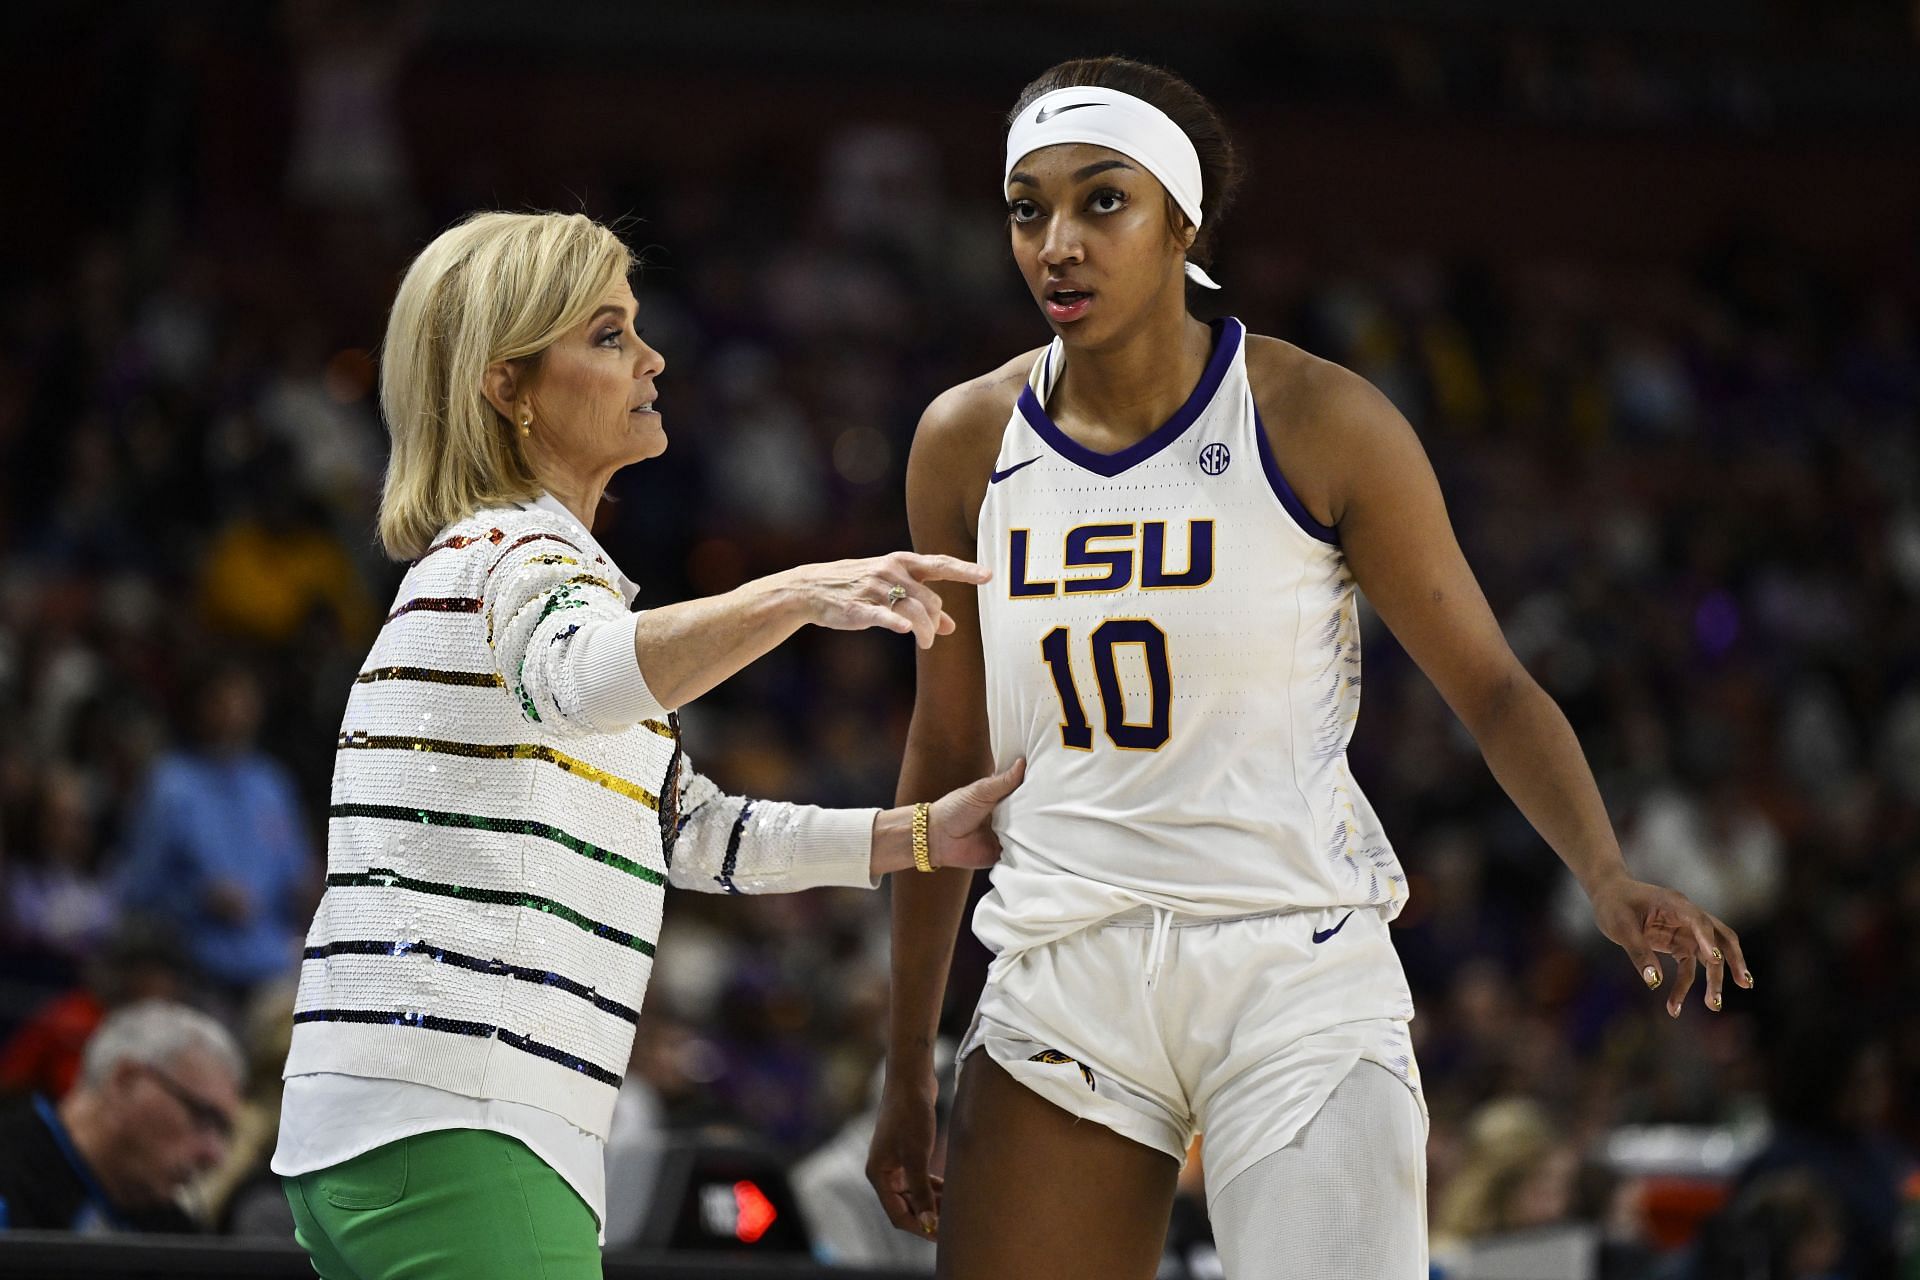 Is LSU still in March Madness? Taking a closer look at Kim Mulkey's